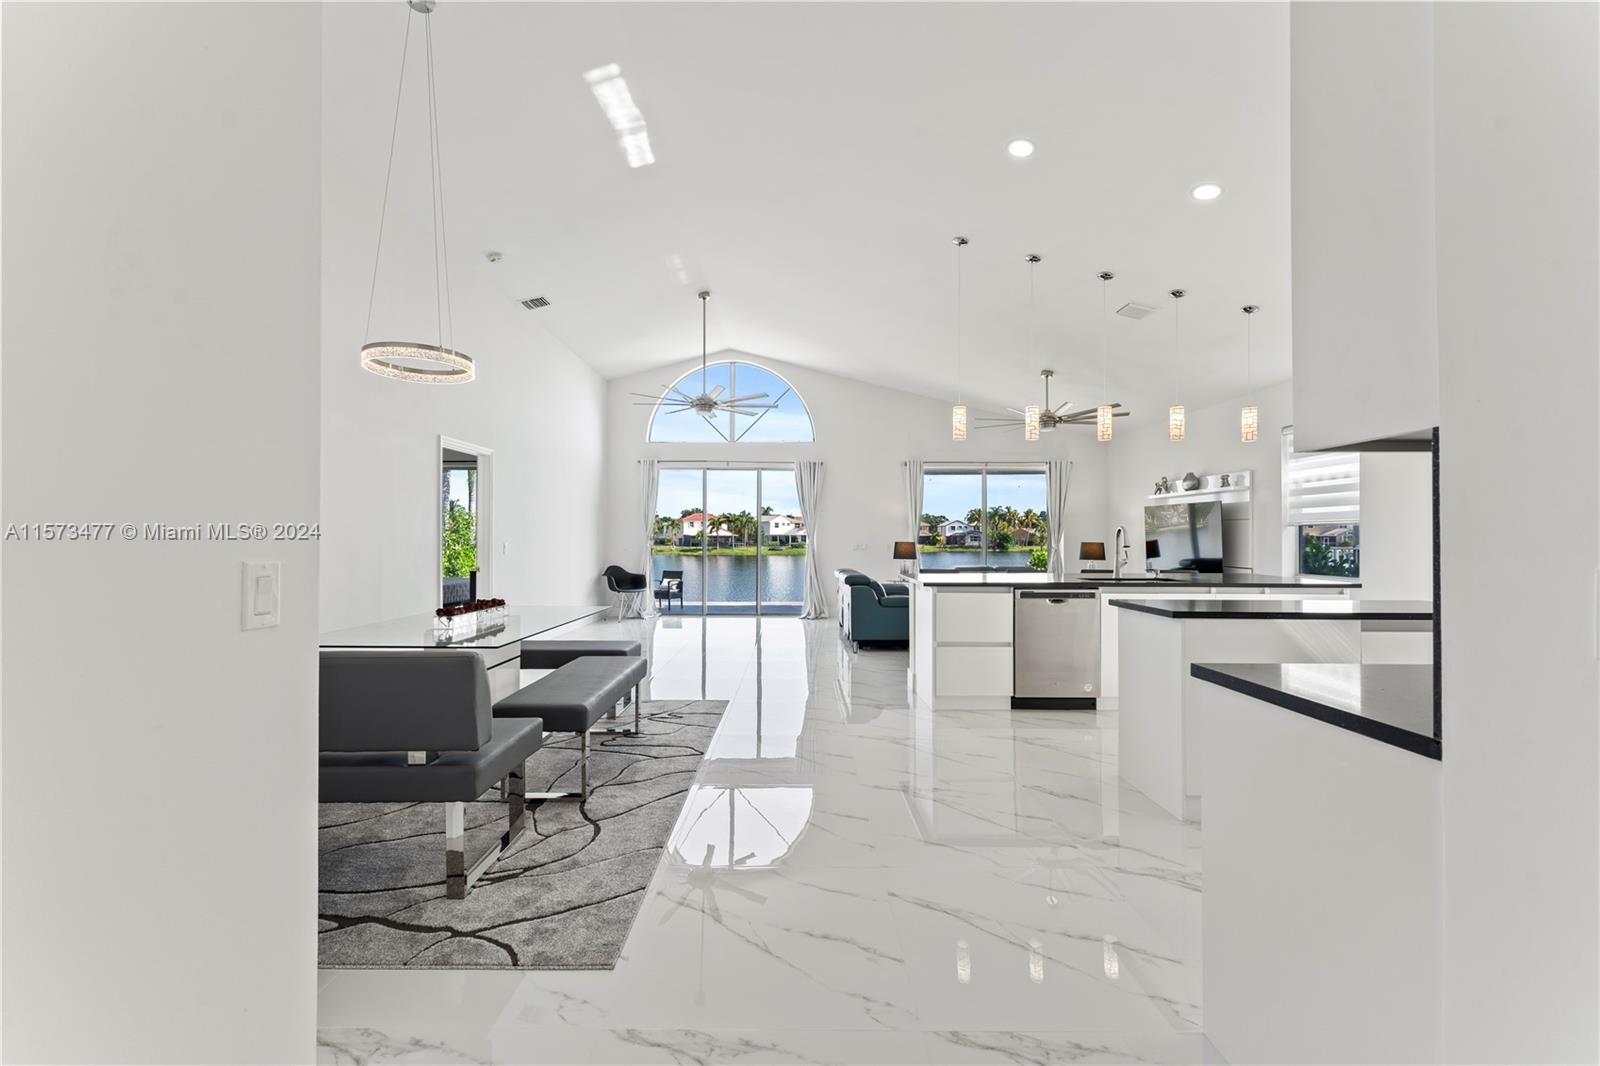 a kitchen with stainless steel appliances kitchen island granite countertop a refrigerator and a view of living room